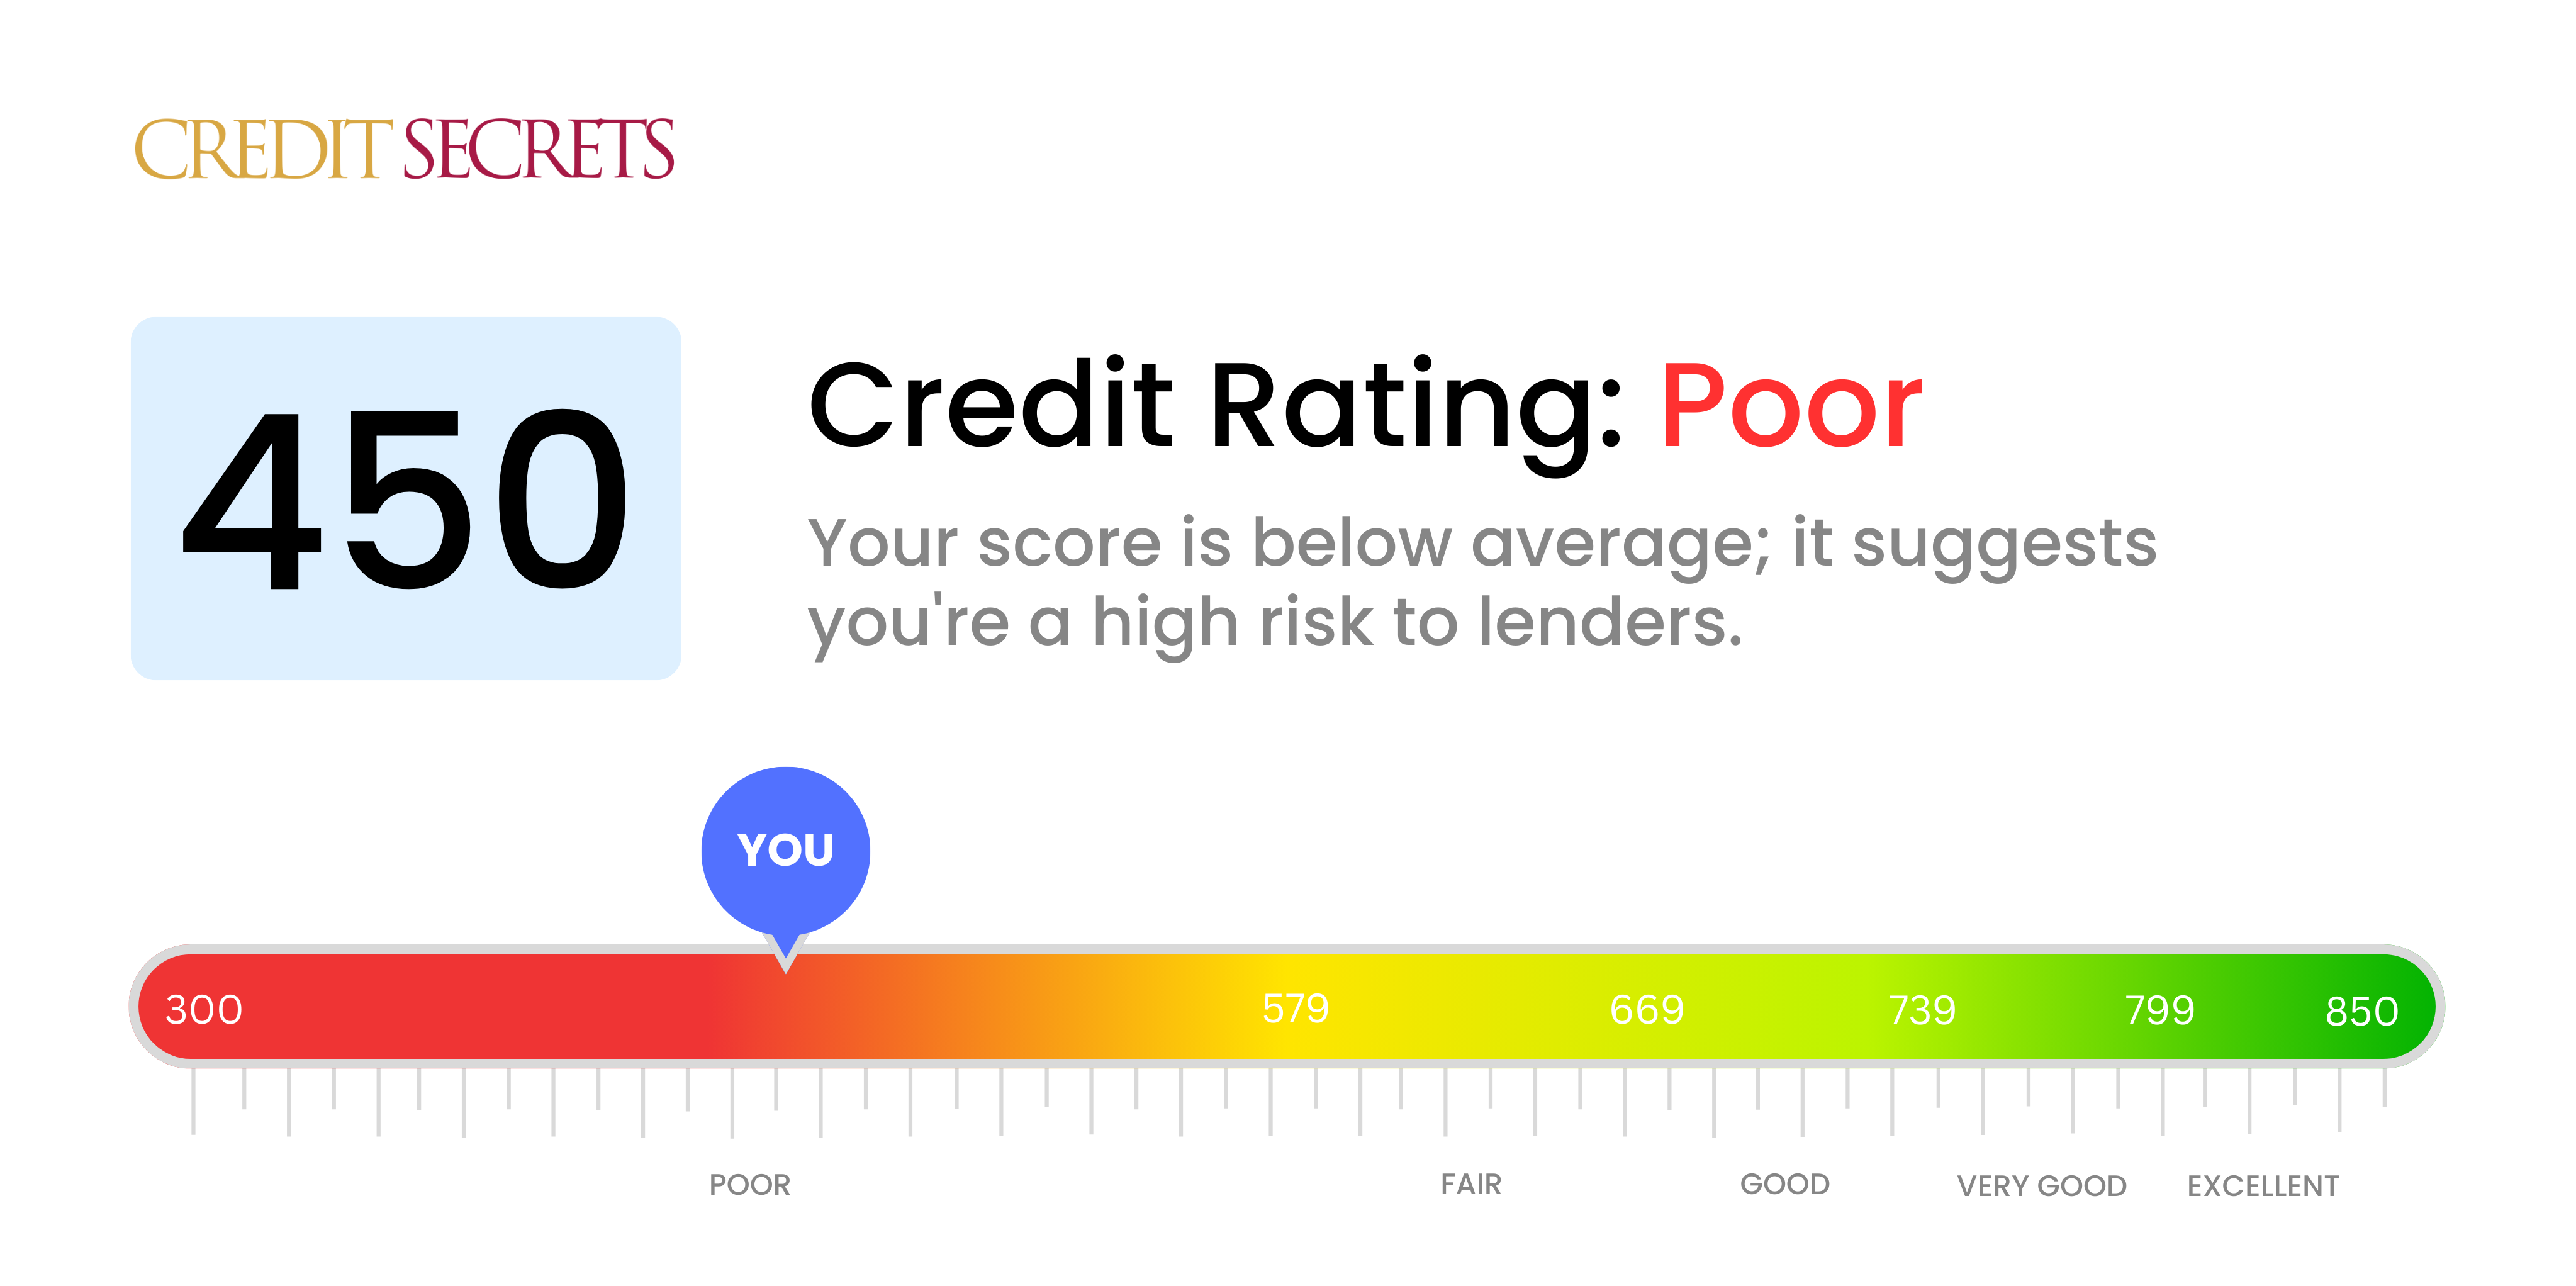 Is 450 a good credit score?